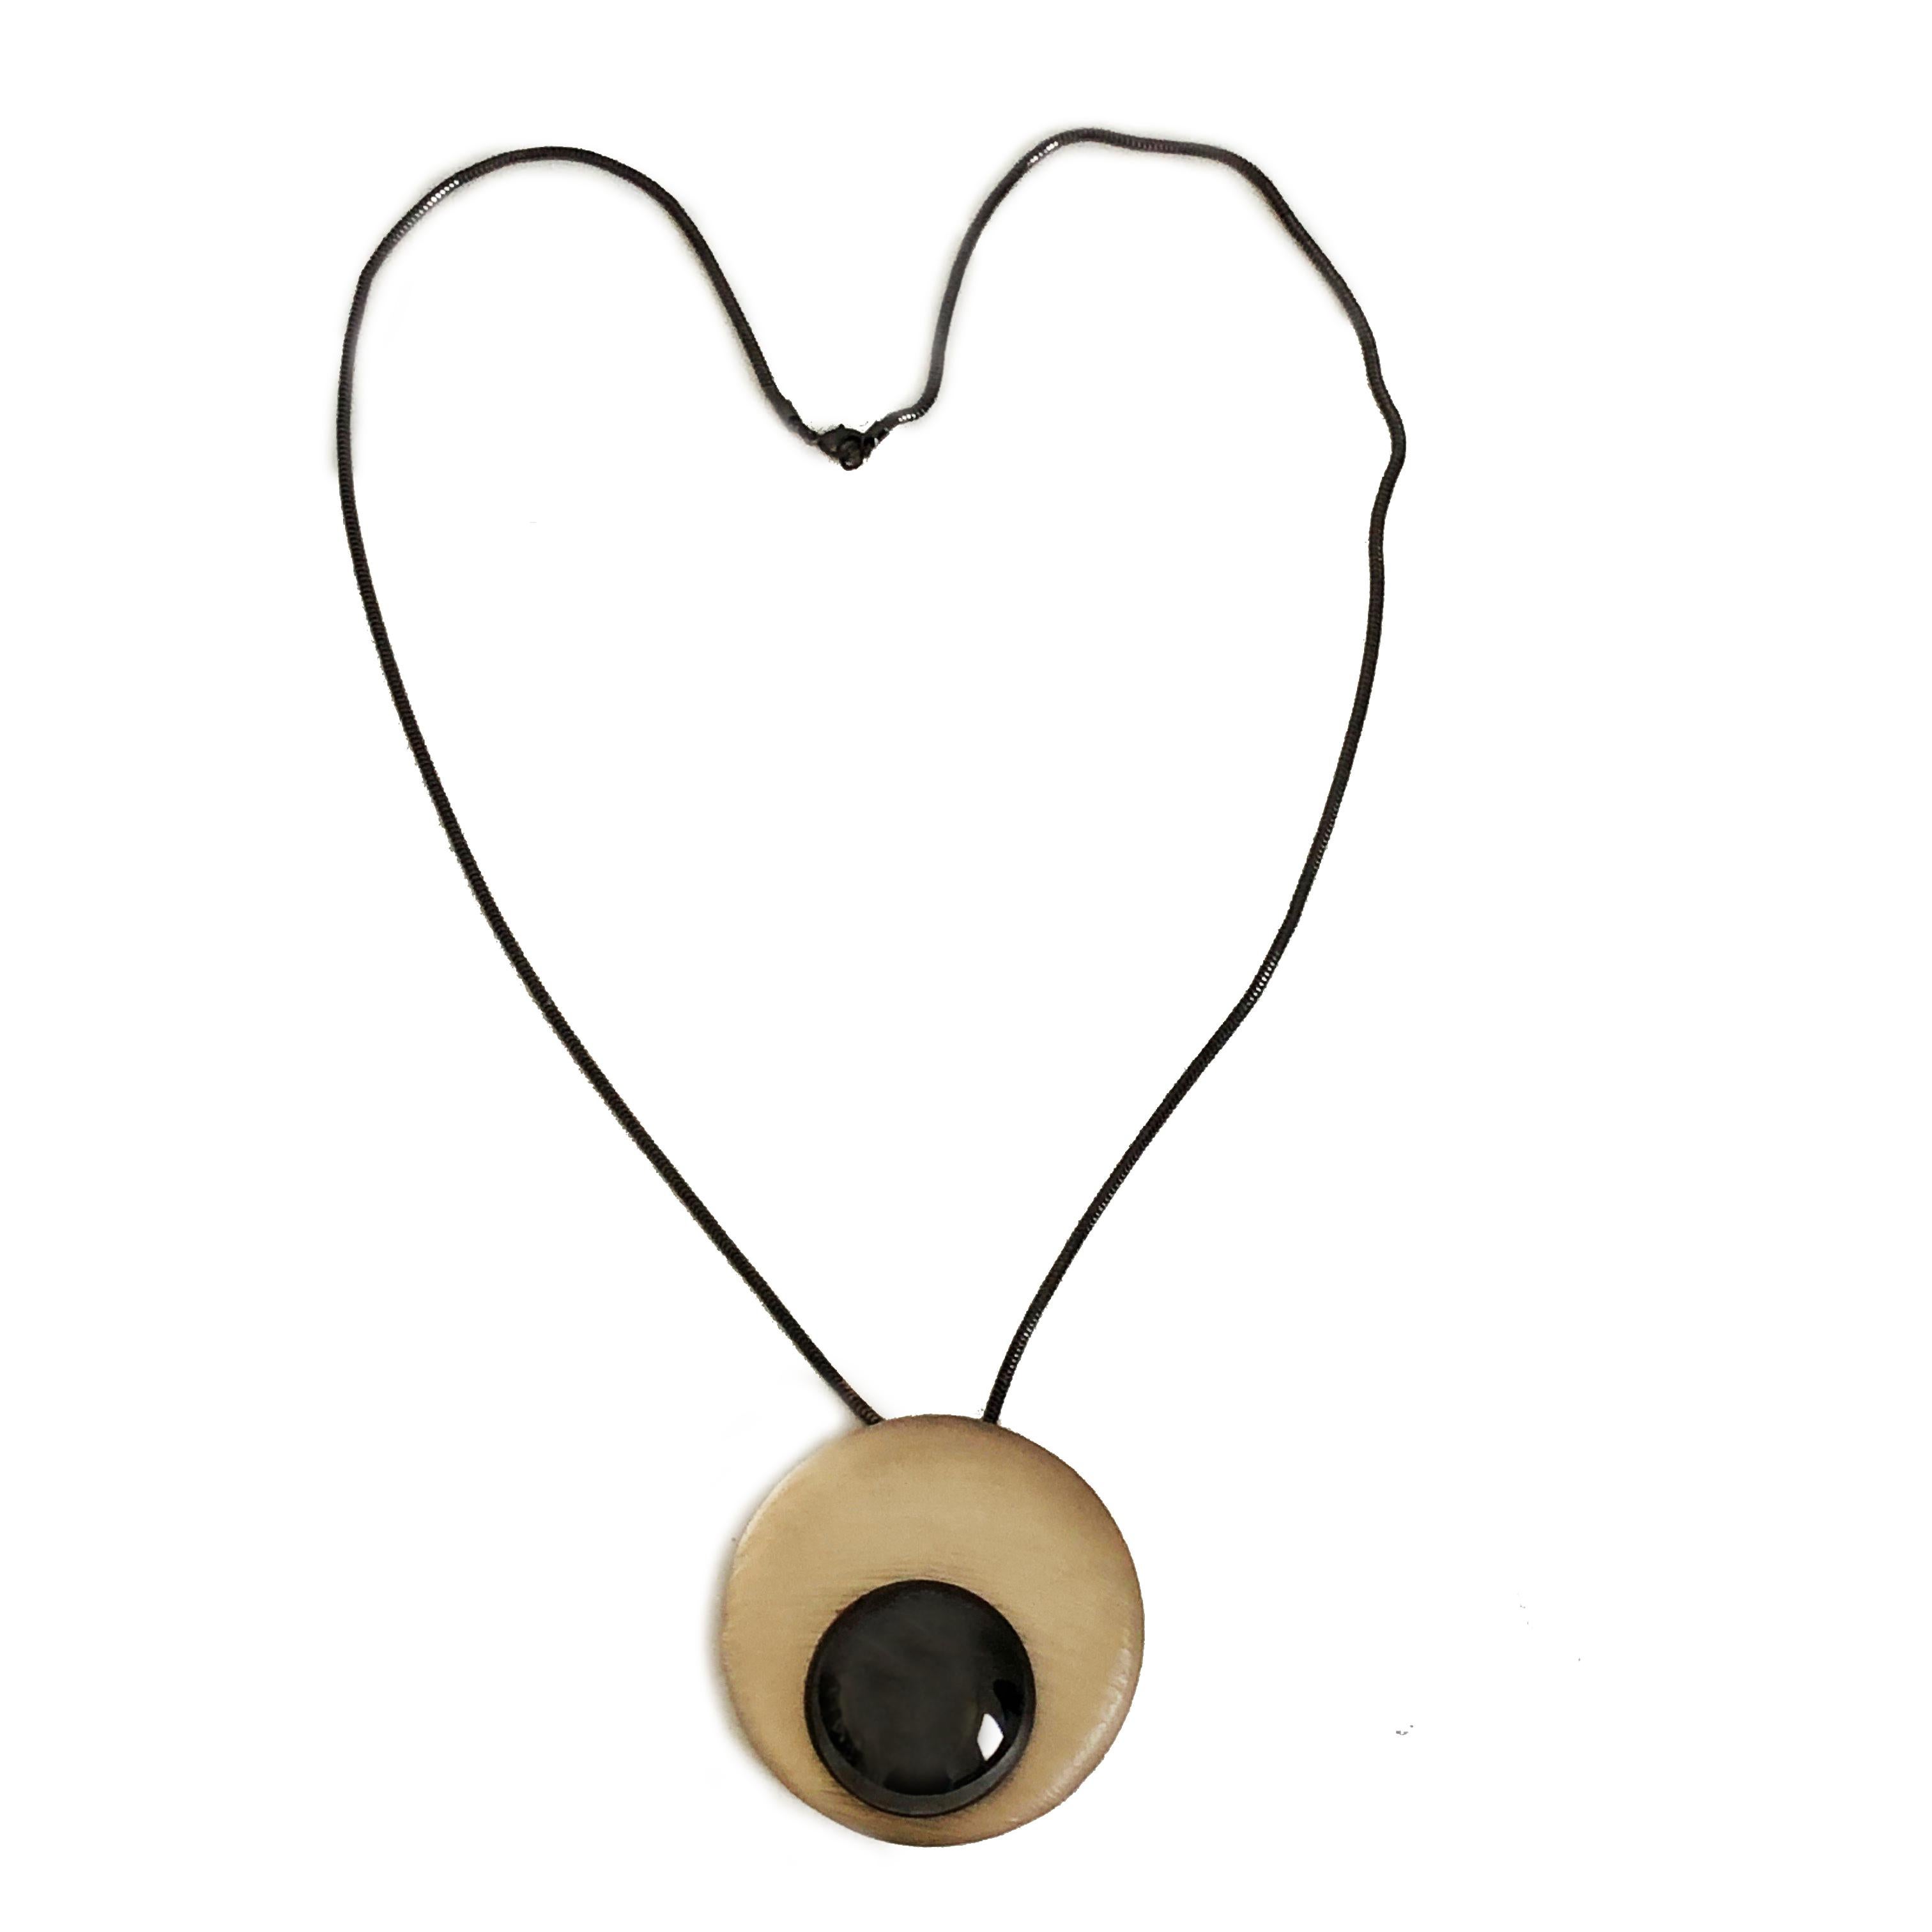 Authentic, preowned Alexis Bittar Hand Carved Modernist Orbs Pendant Necklace with Chain. Note this is one of Bittar's early pieces, likely created in the late 1990s. Gunmetal chain and small orb, textured pale yellow large orb. Preowned w/minimal